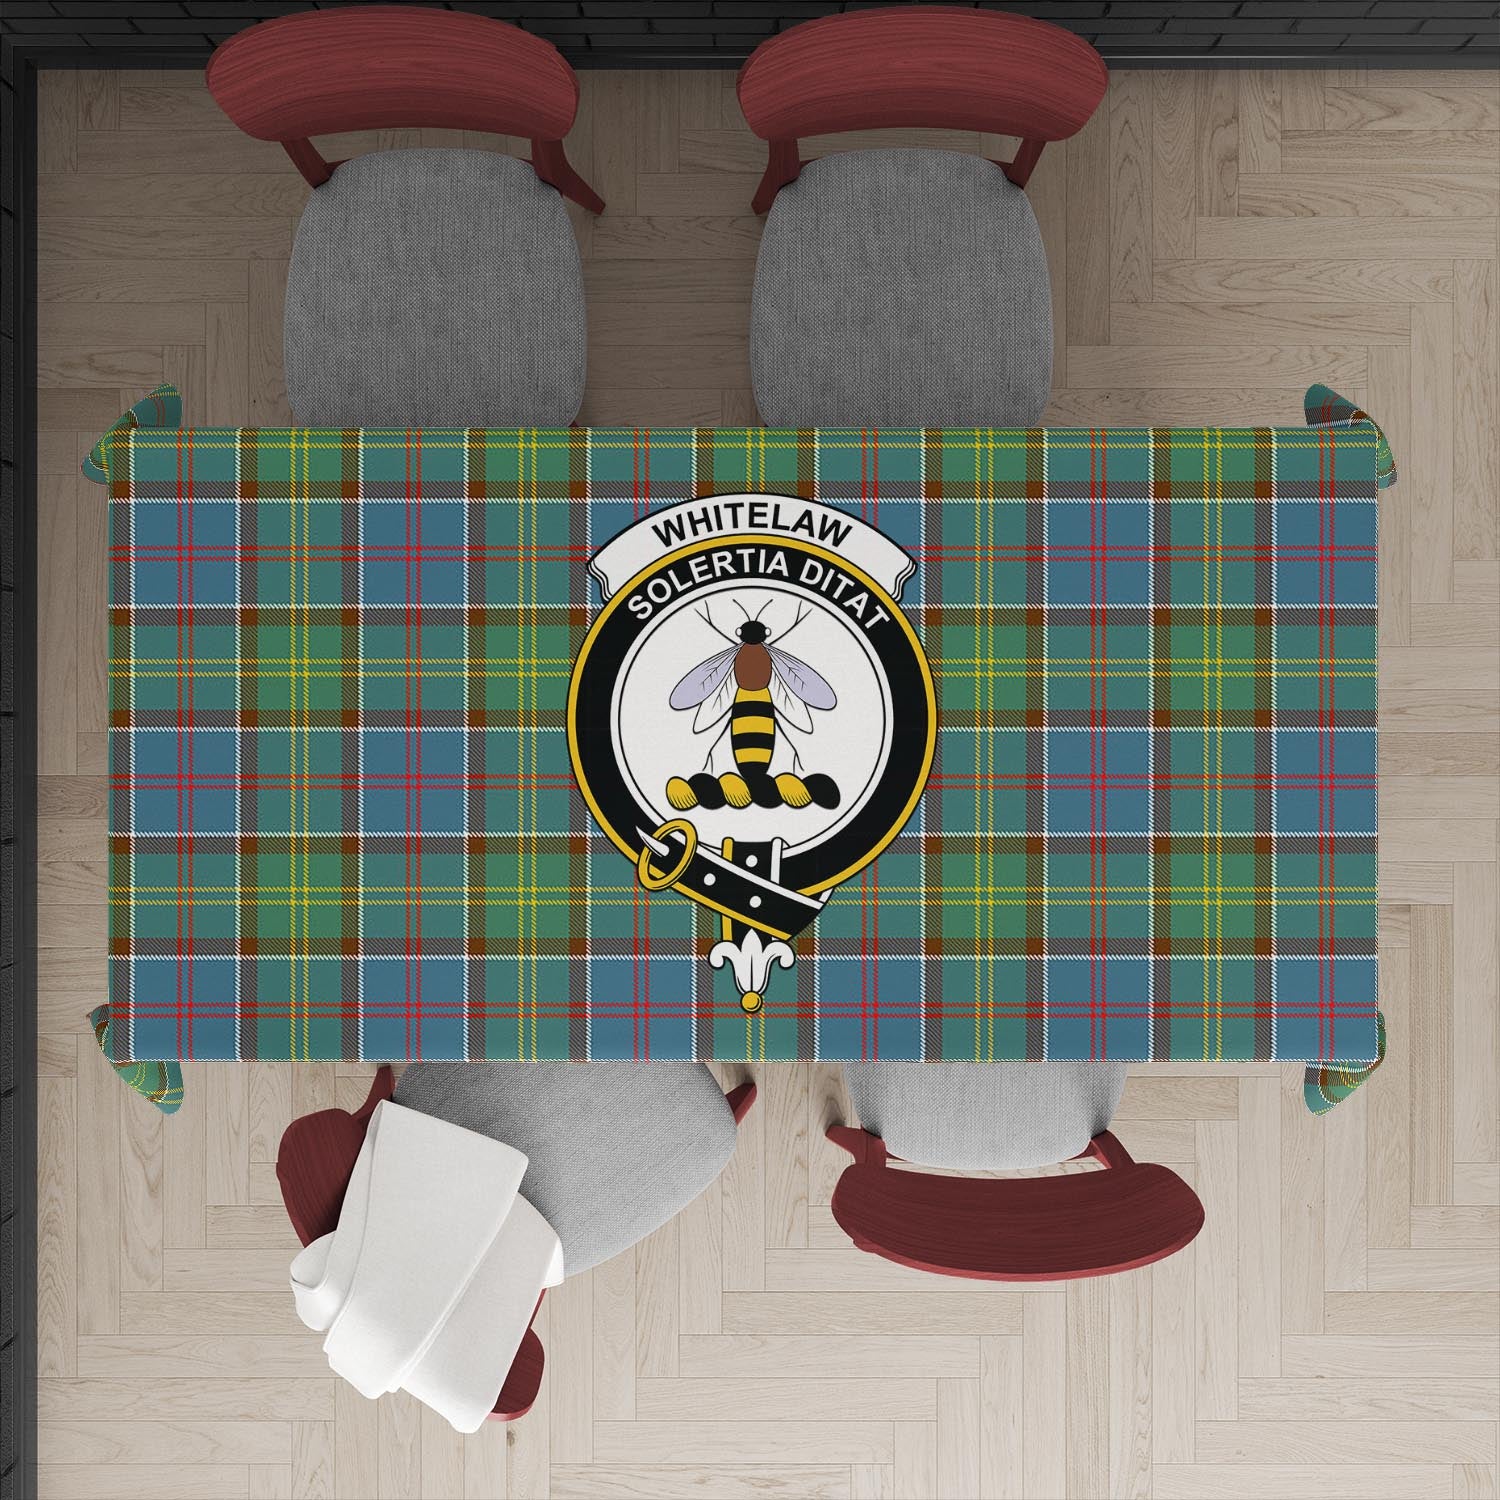 whitelaw-tatan-tablecloth-with-family-crest